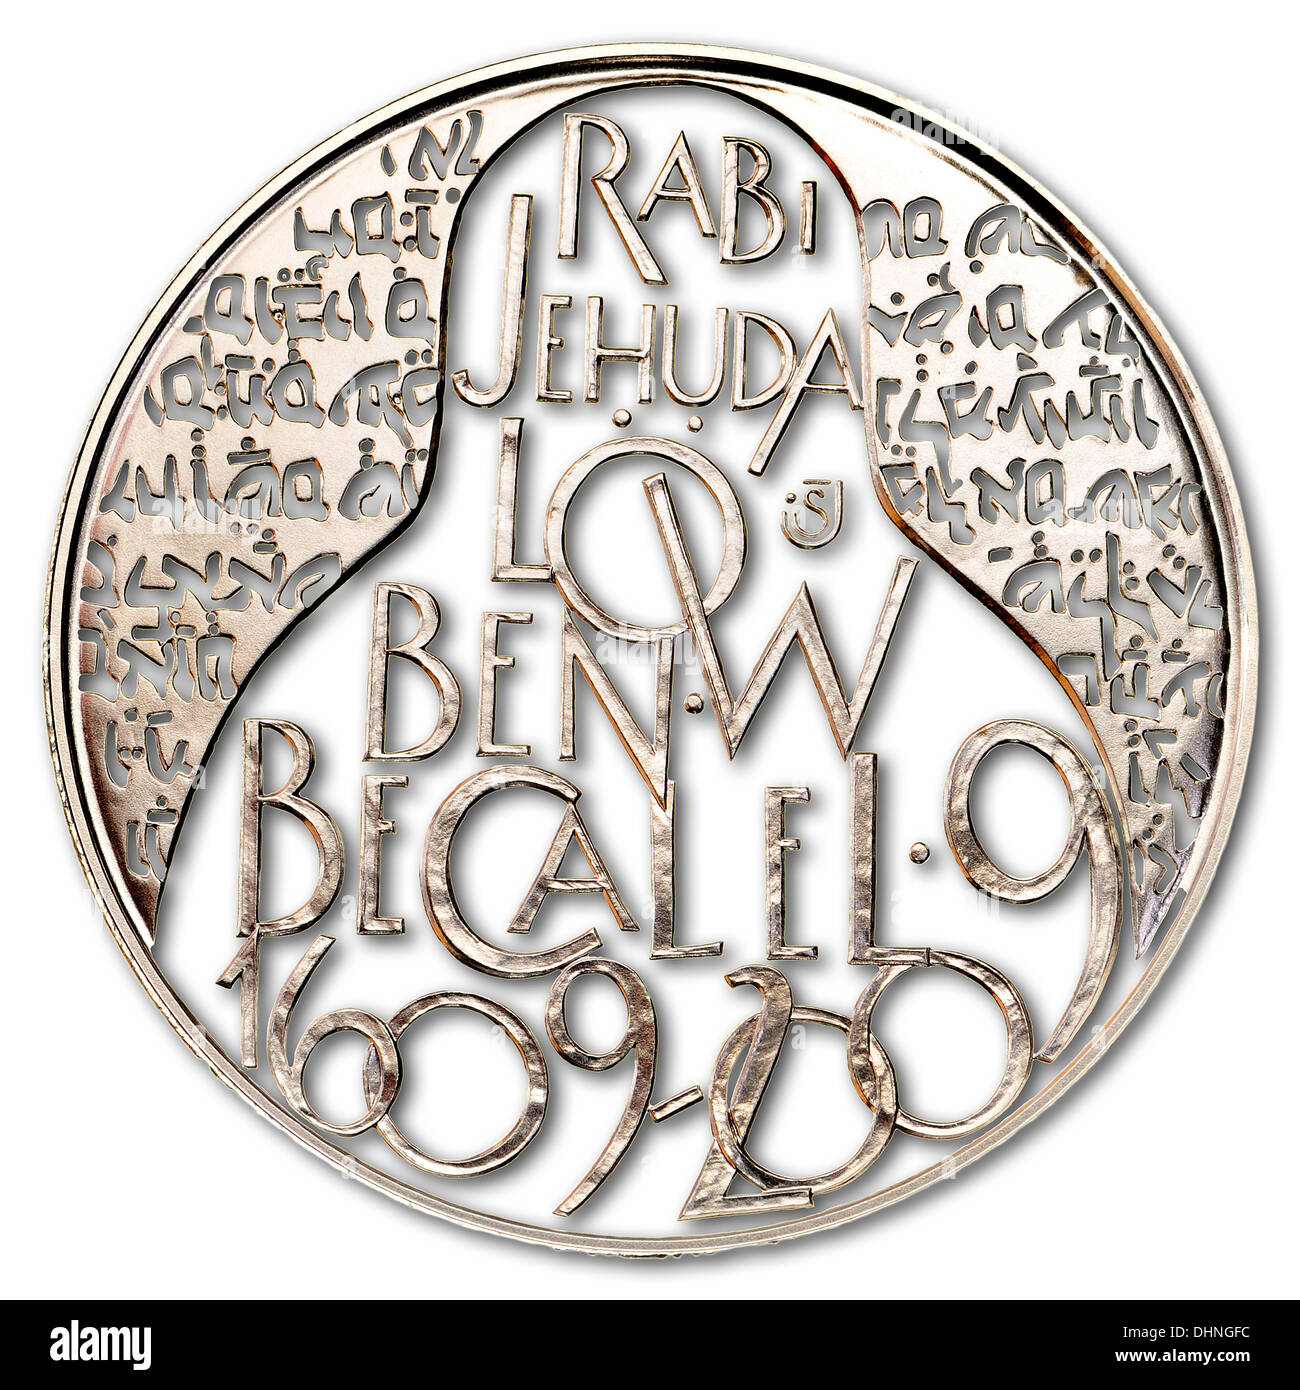 200Kc Silver commemorative coin (cutout details) from the Czech Republic. 400th anniversary of the death of scholar Rabbi Jehuda Löw ben Becalel Stock Photo